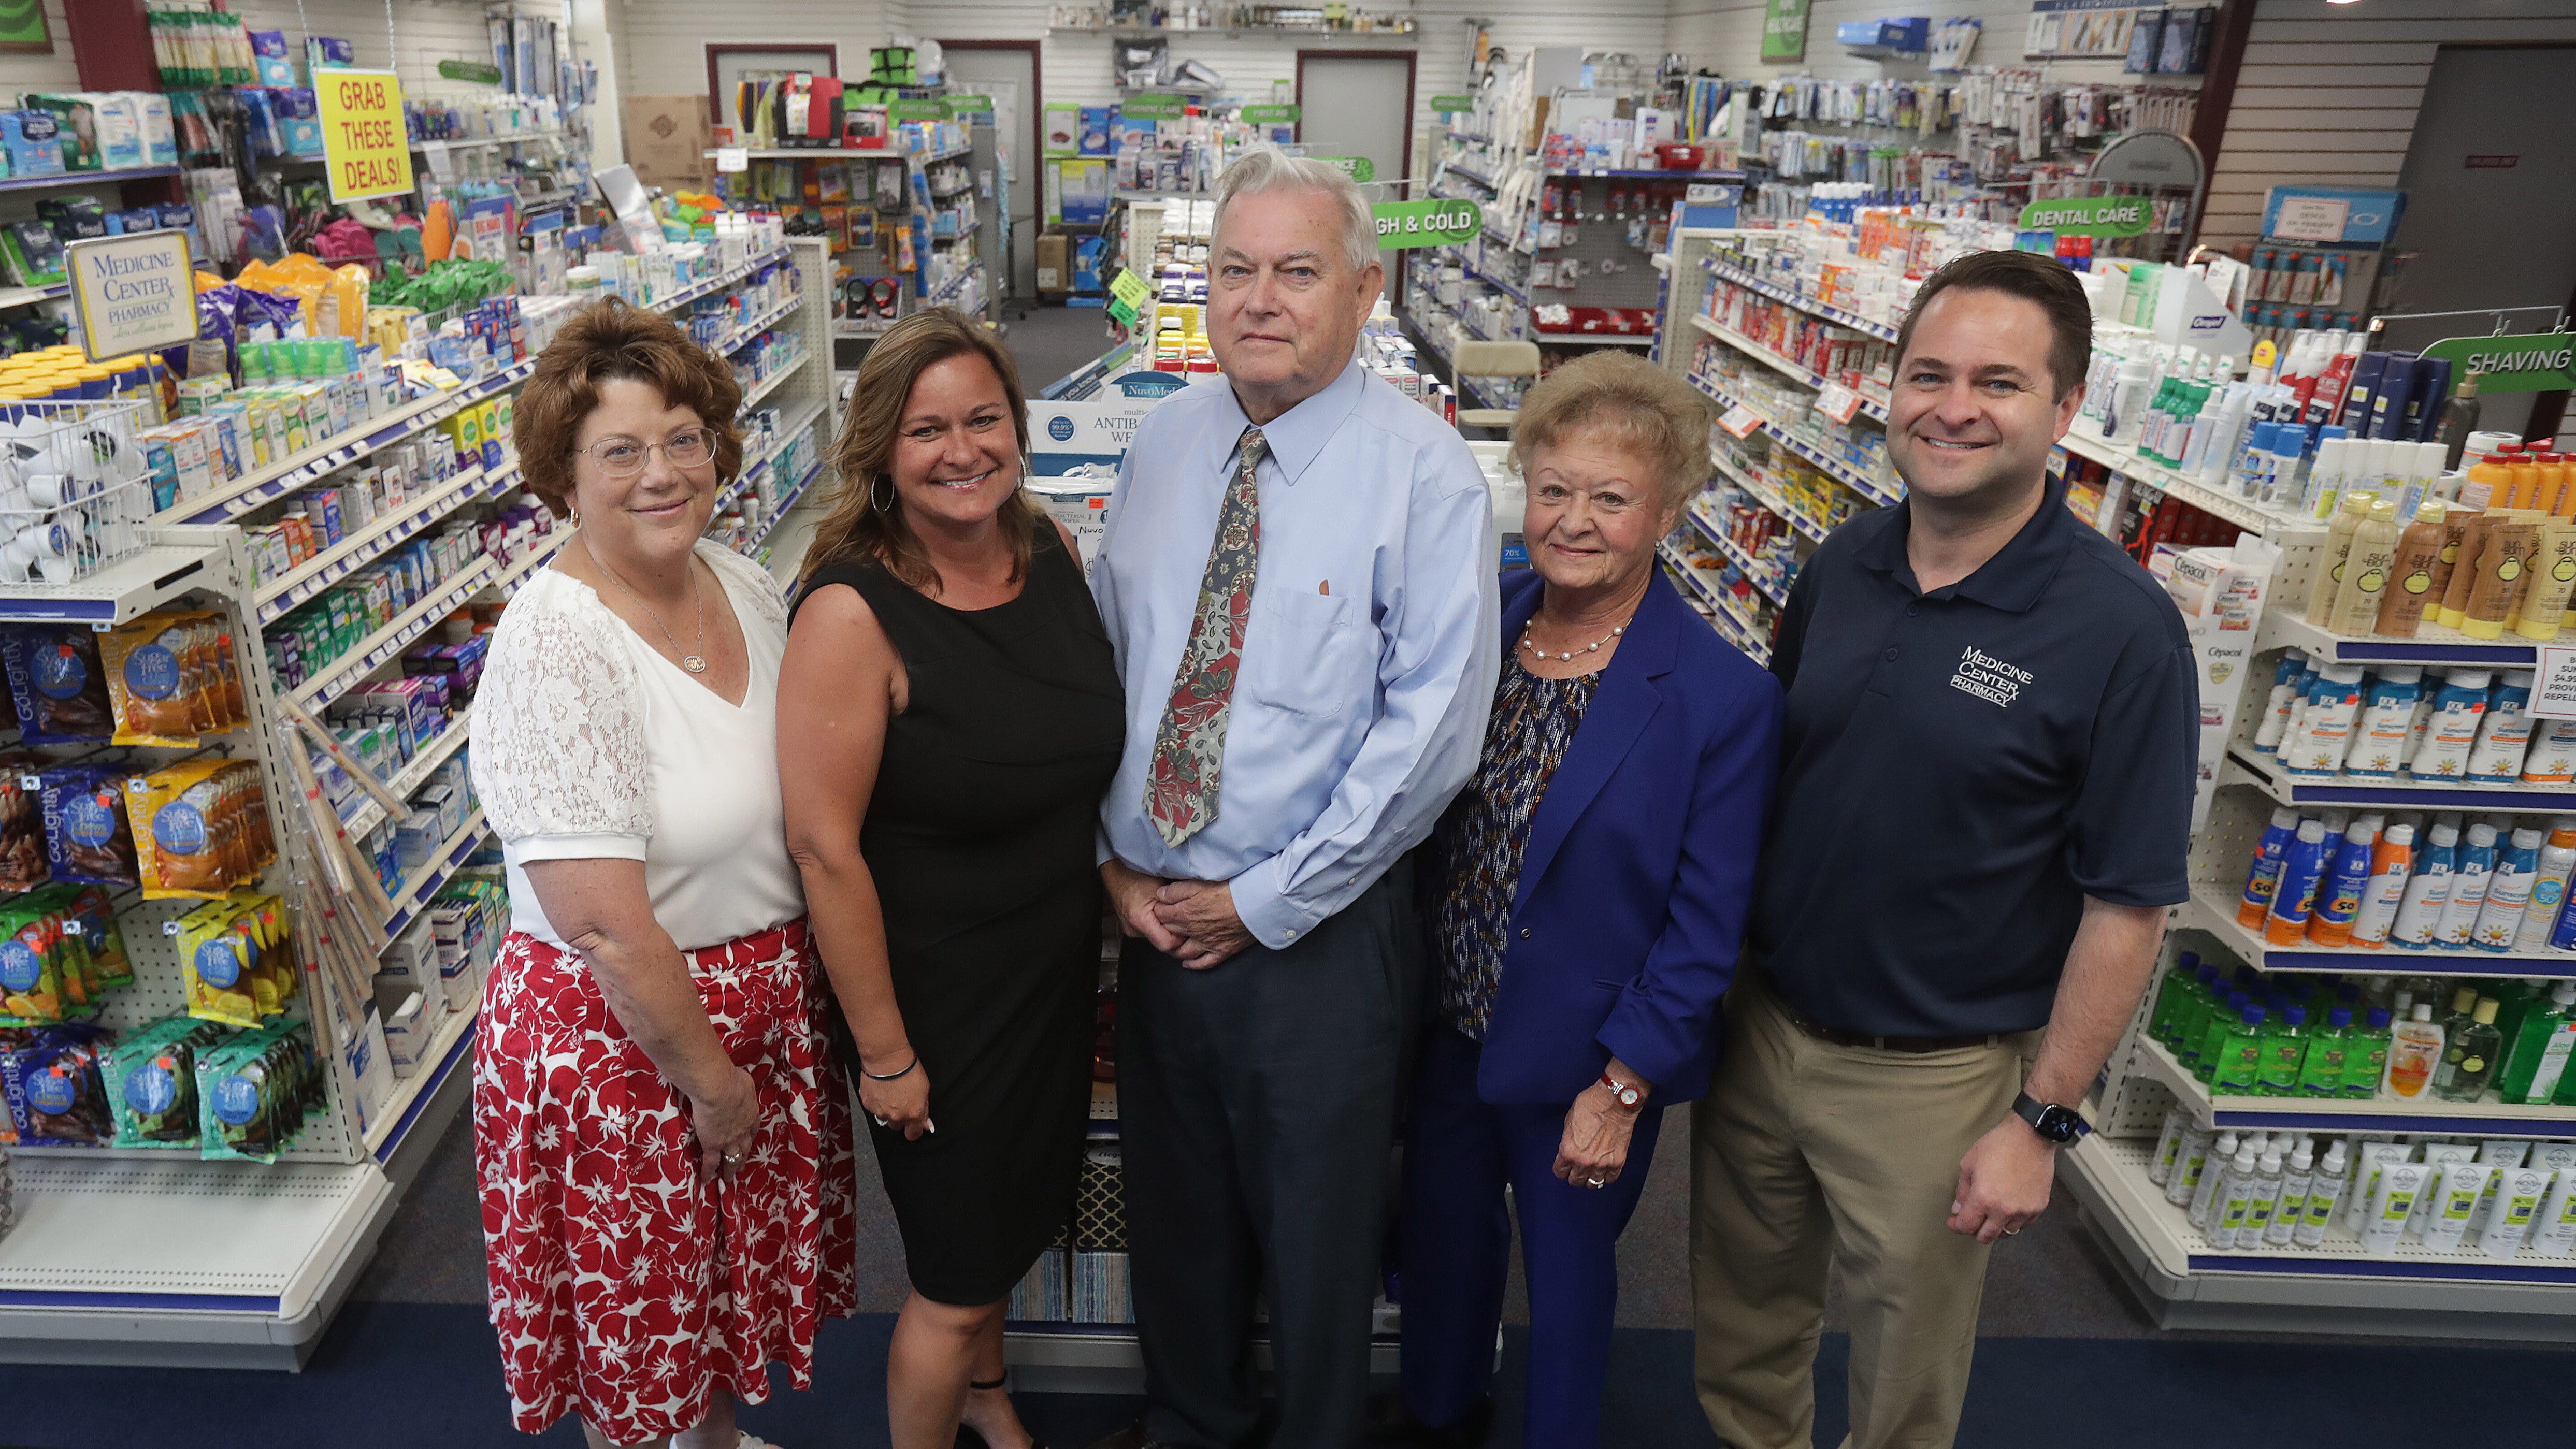 The Medicine Center family, from left, Nancy Wharmby, Joy Parkinson, Paul White, Susan White and Brad White. The pharmacy operation has been growing in Stark County since 1976.